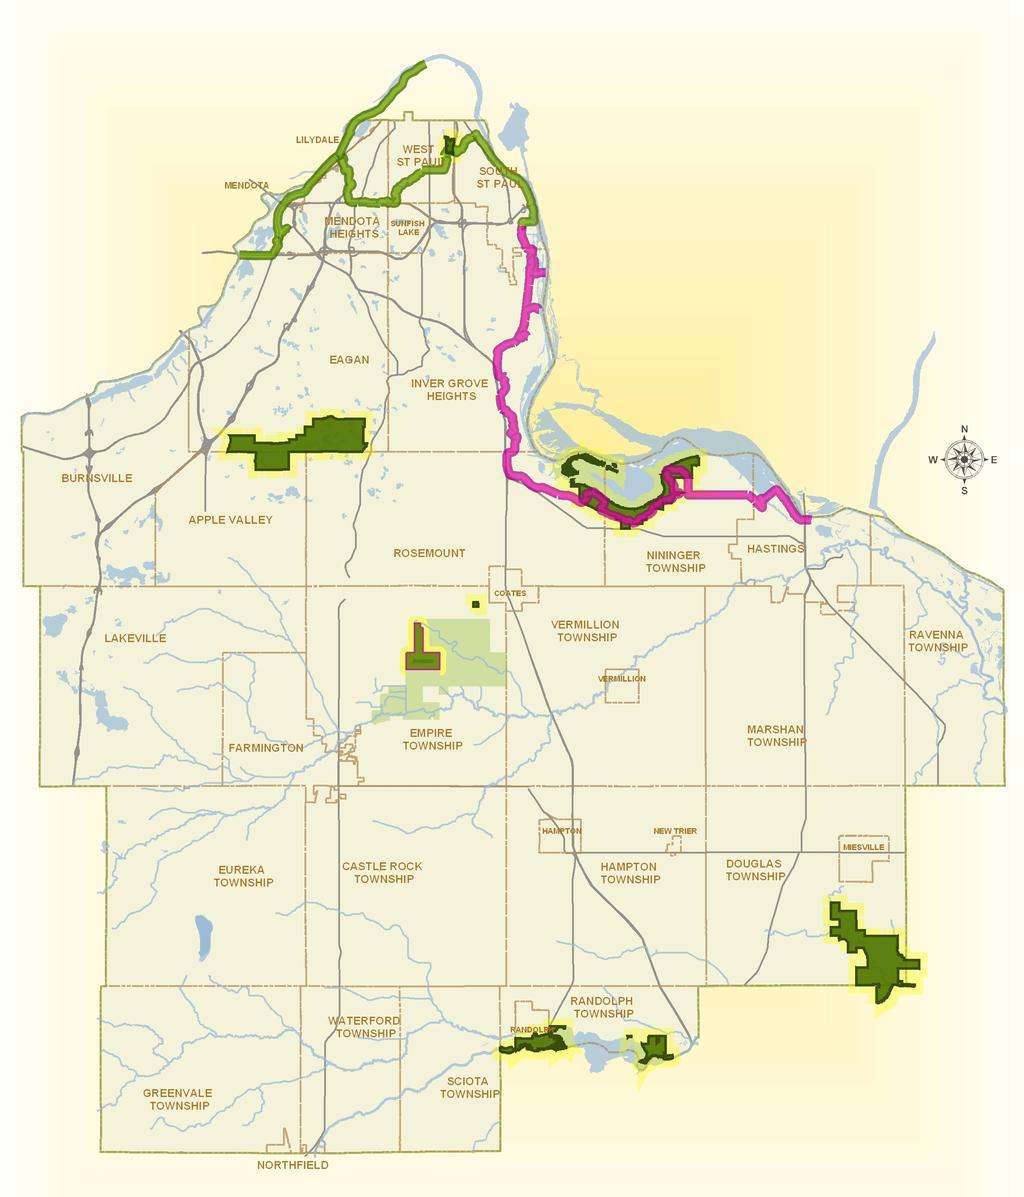 Inventory of Dakota County Parks and Trails Big Rivers Regional Trail (BRRT): 4.5 miles. Scenic views of rivers, bluffs, woods, prairie, and historic landmarks. Thompson County Park: 58 acres.